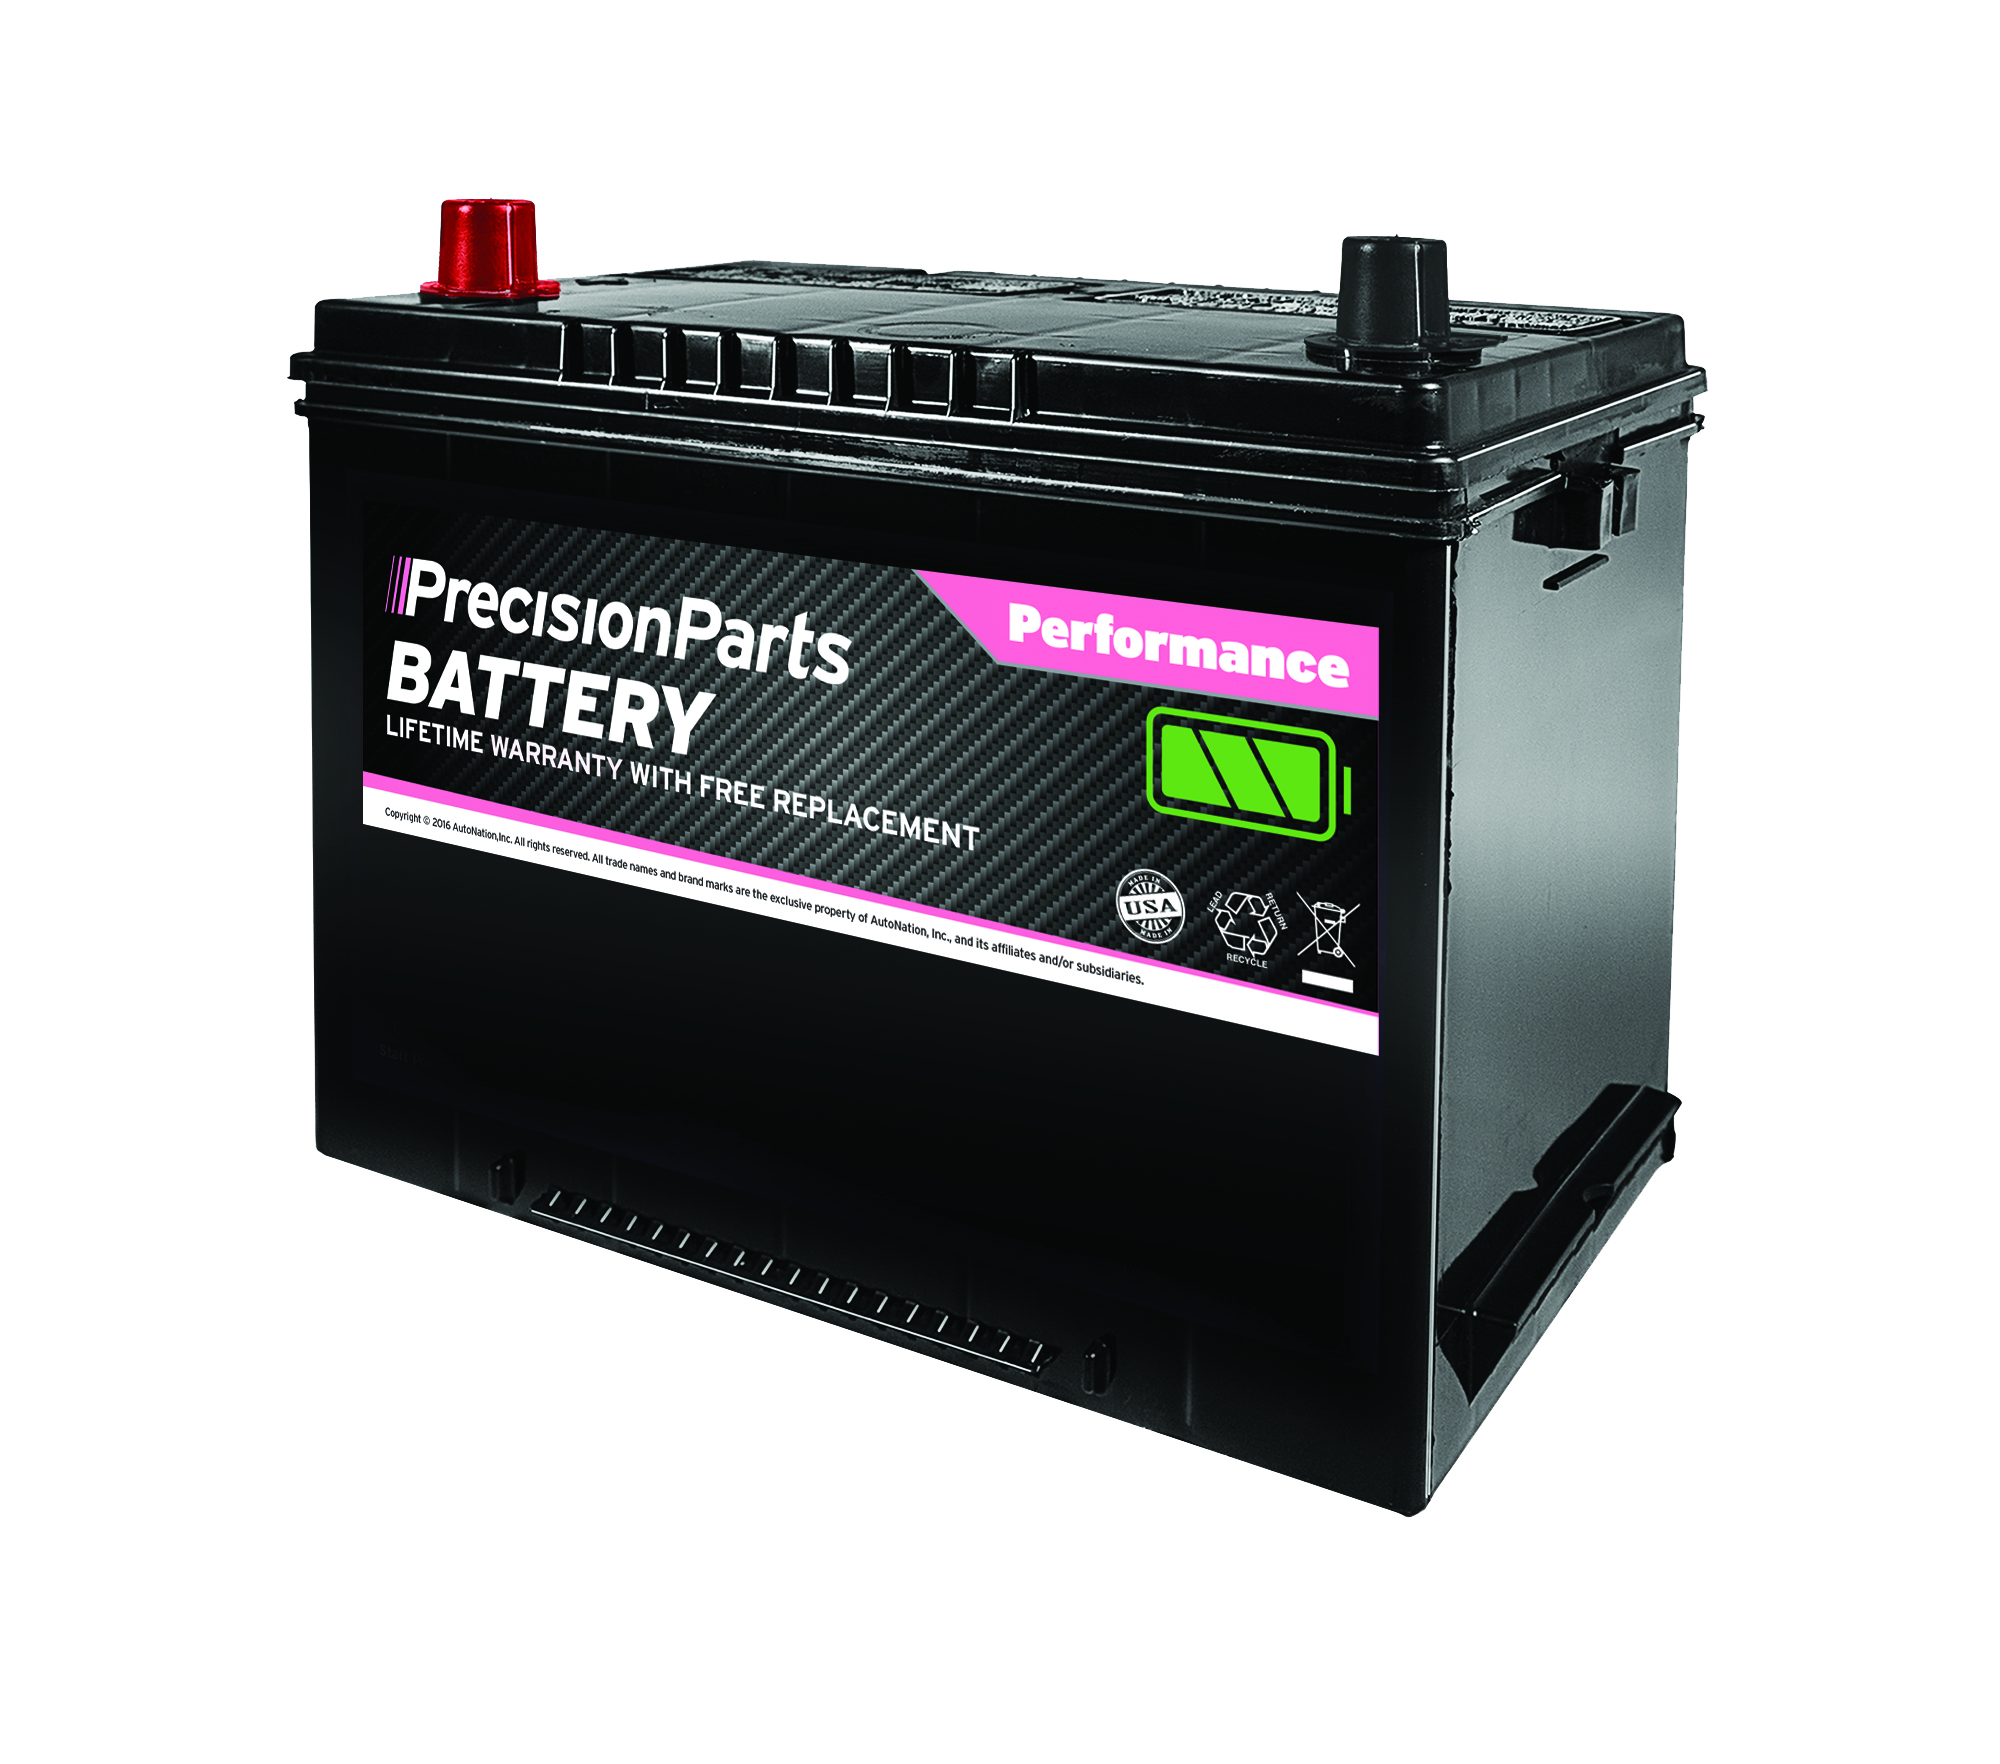 PrecisionParts Battery - Performance